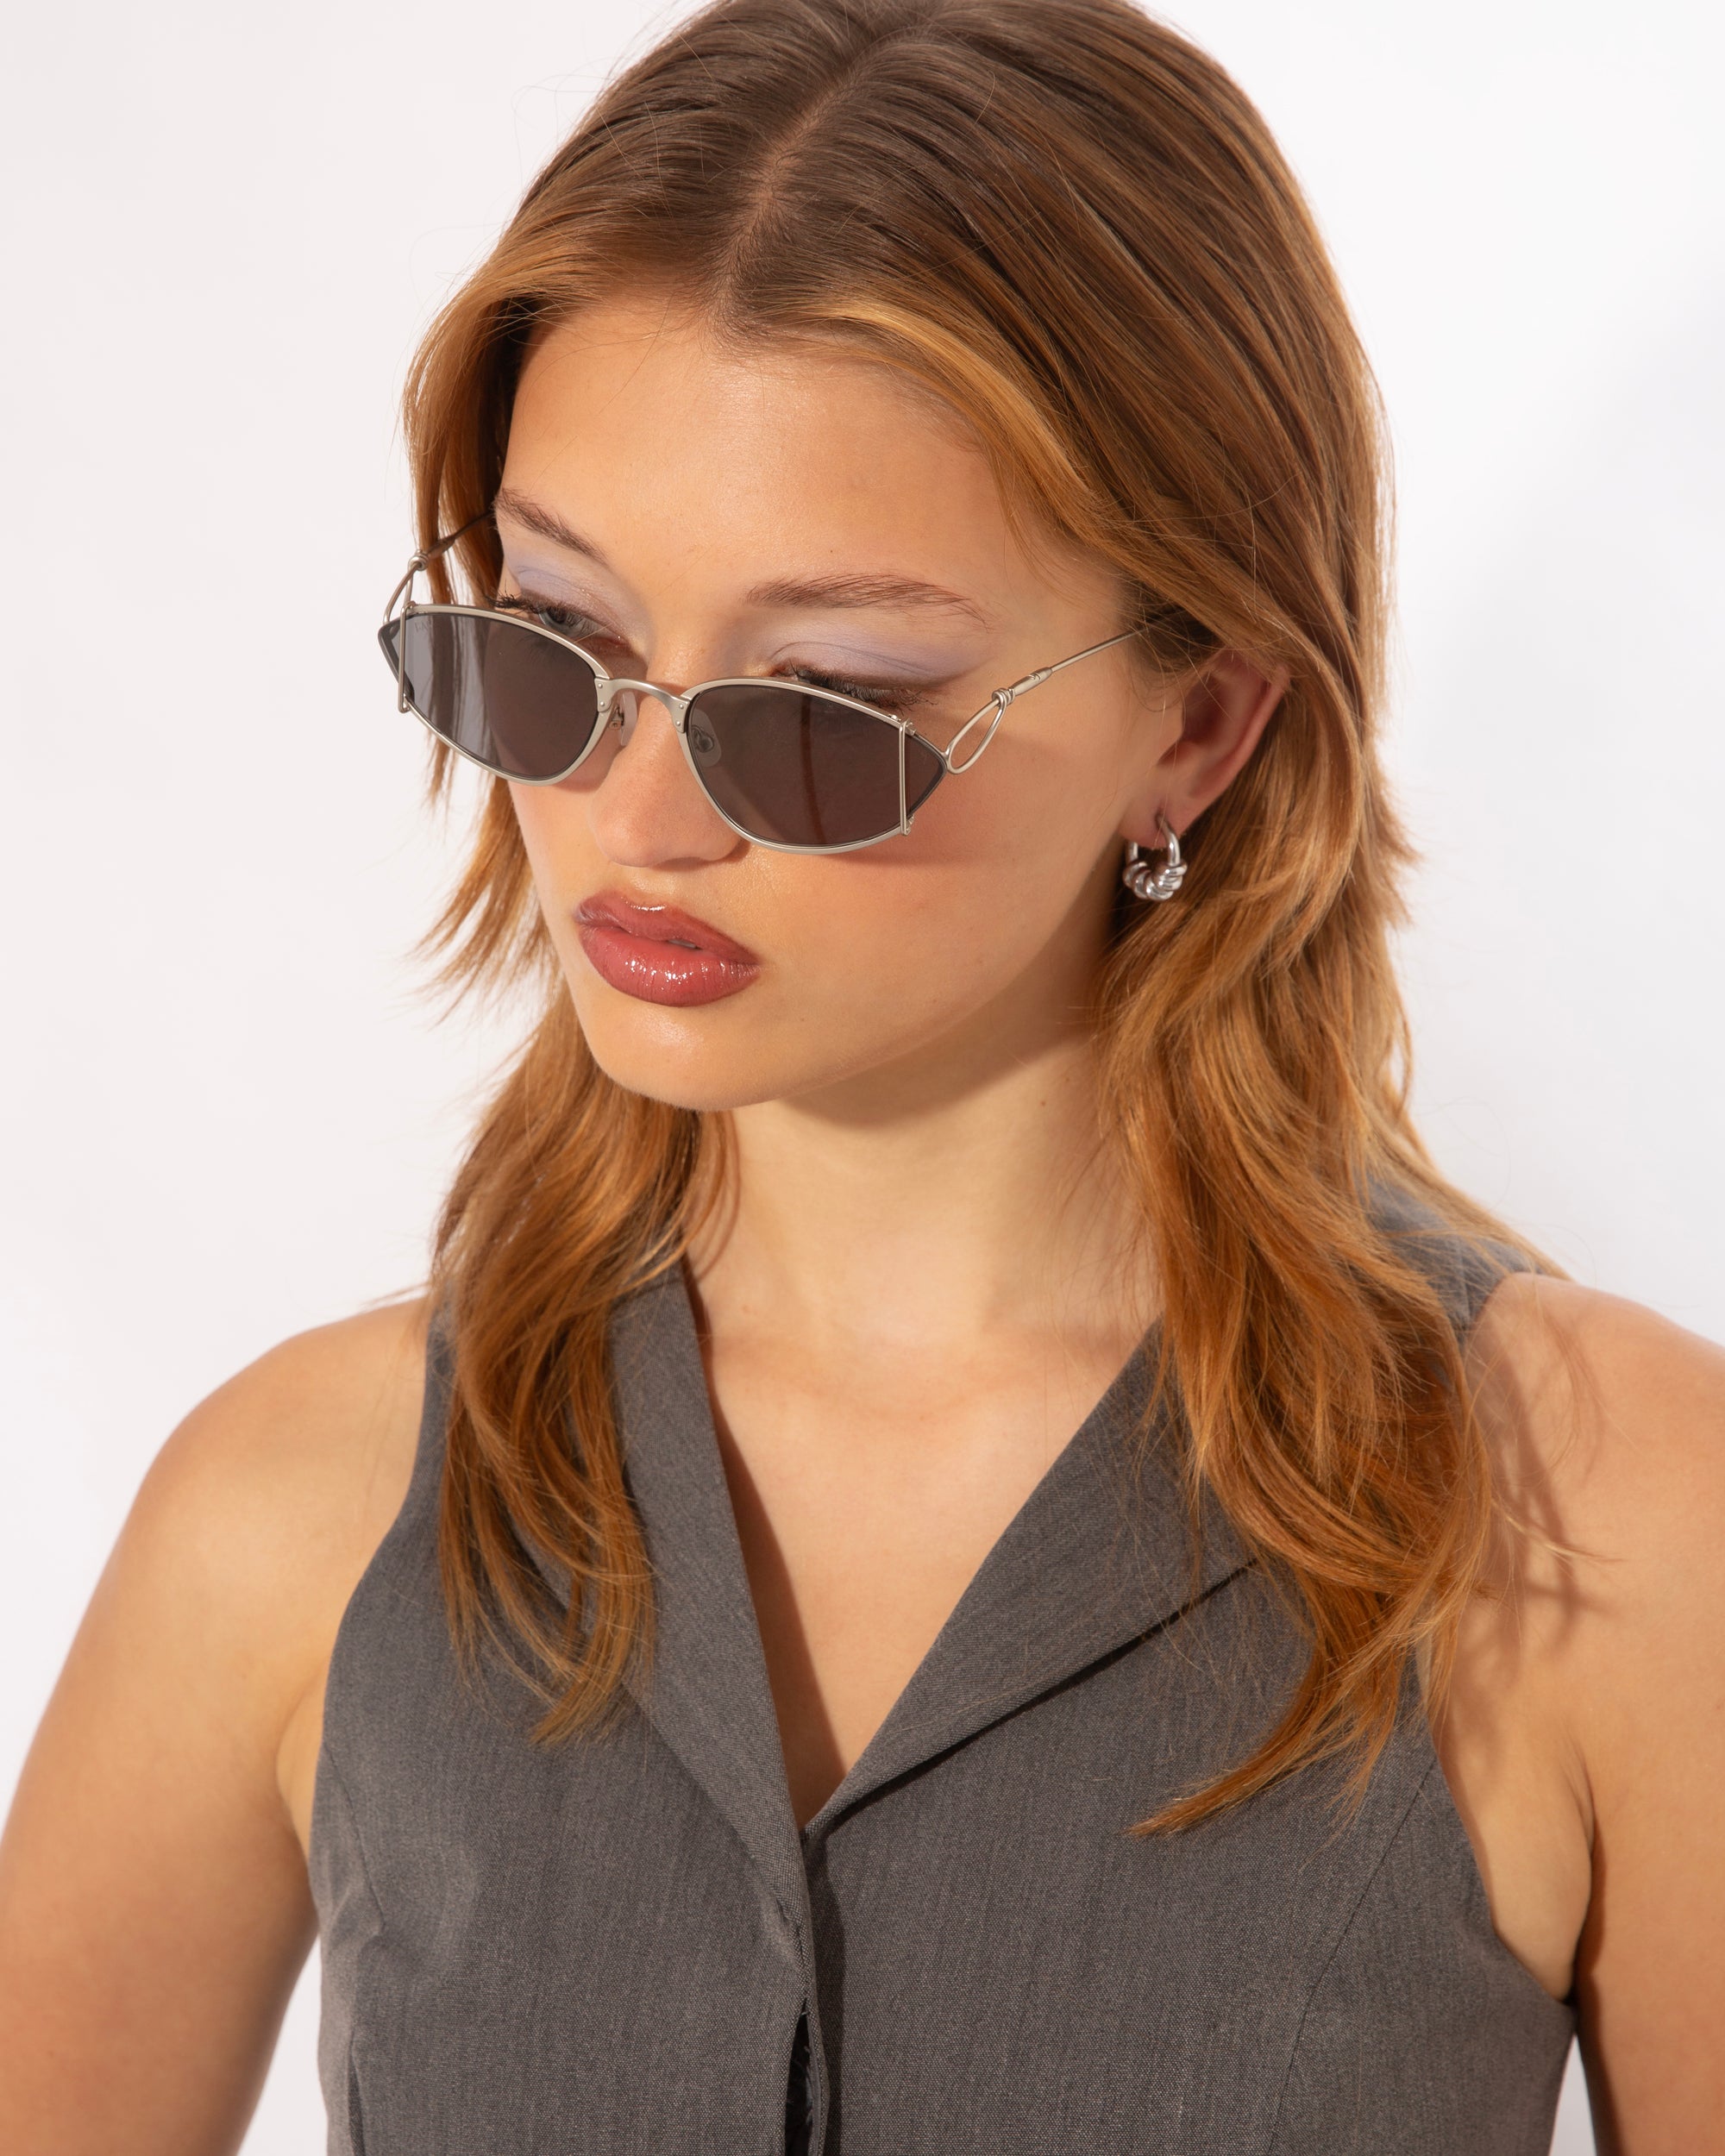 A person with shoulder-length hair is wearing For Art&#39;s Sake® Ornate sunglasses with anti-reflective coating and a sleeveless grey top. They are looking slightly downwards with a neutral expression. The background is plain white.